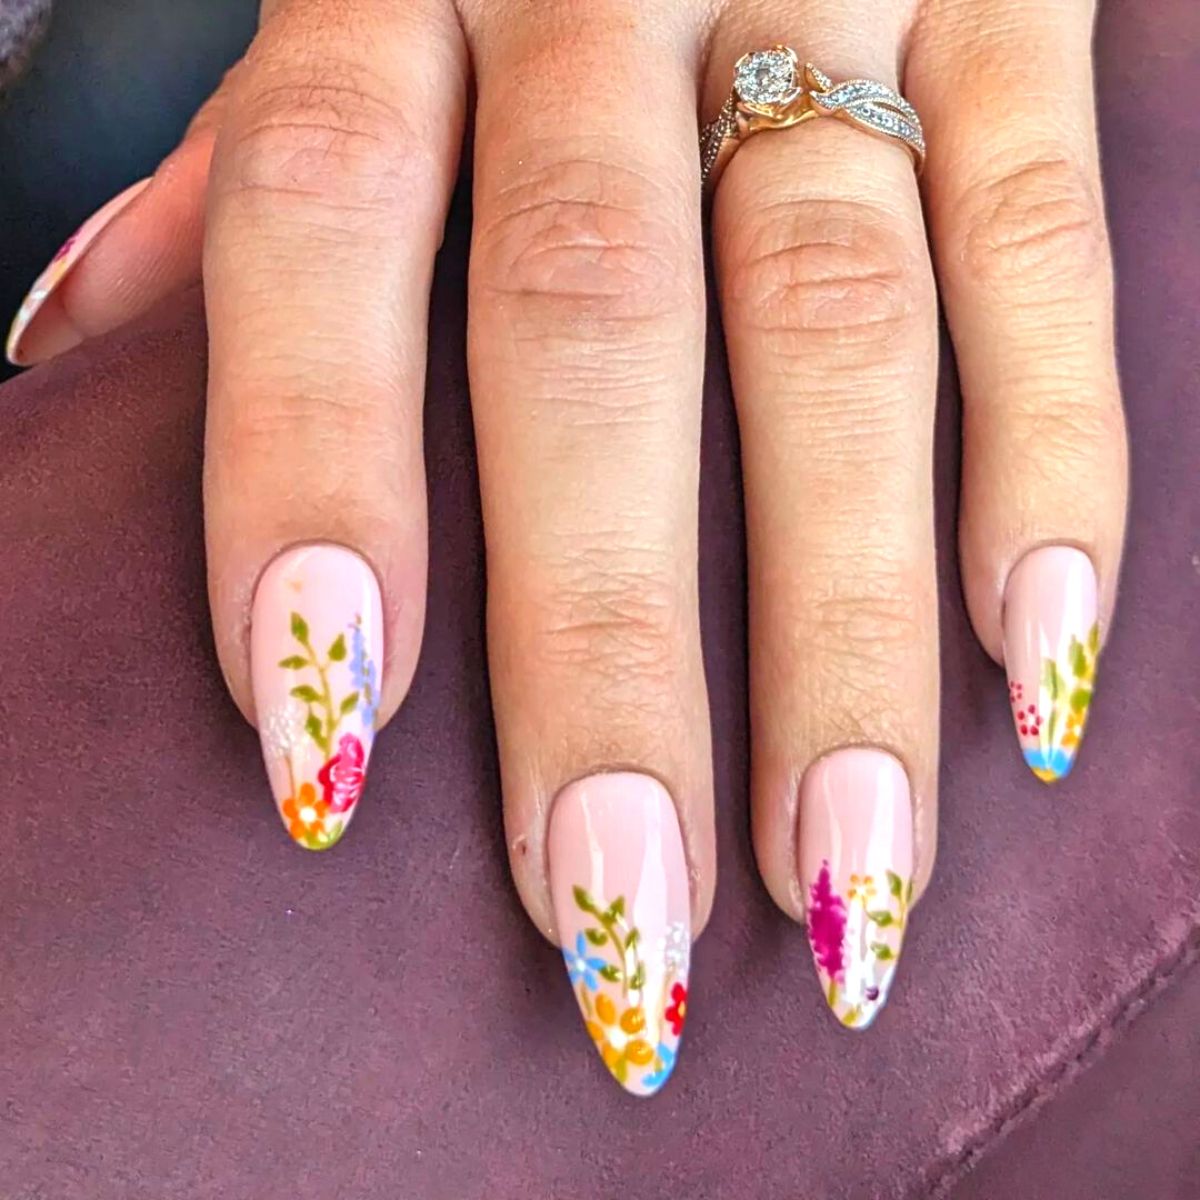 Pastel and bold colored manicure with flowers